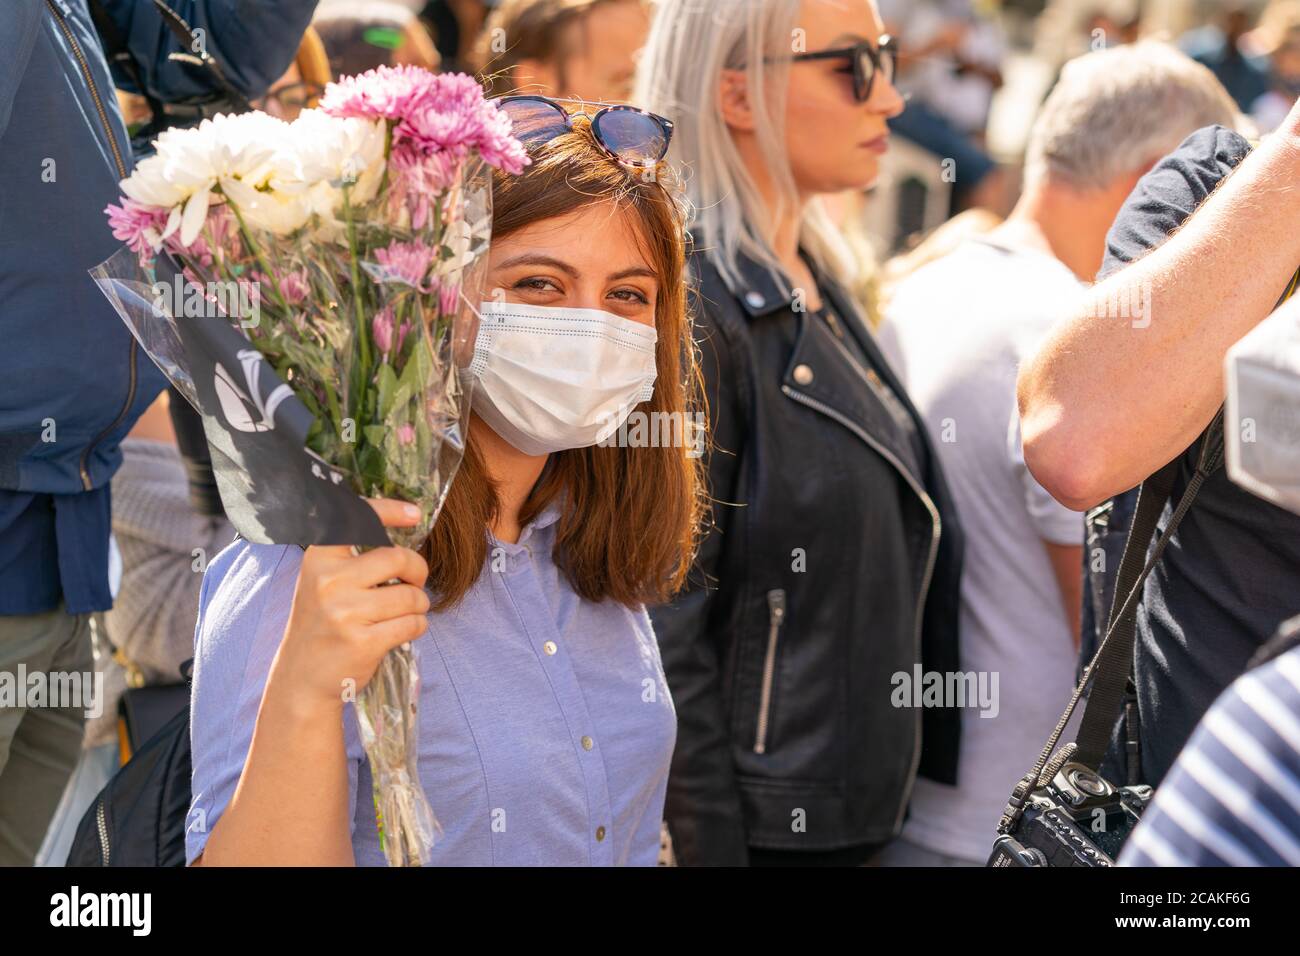 LONDON, ENGLAND - JULY 28, 2020: Beautiful female Johnny Depp fan outside the High Court  wearing a face mask during the Court case against The Sun Ne Stock Photo